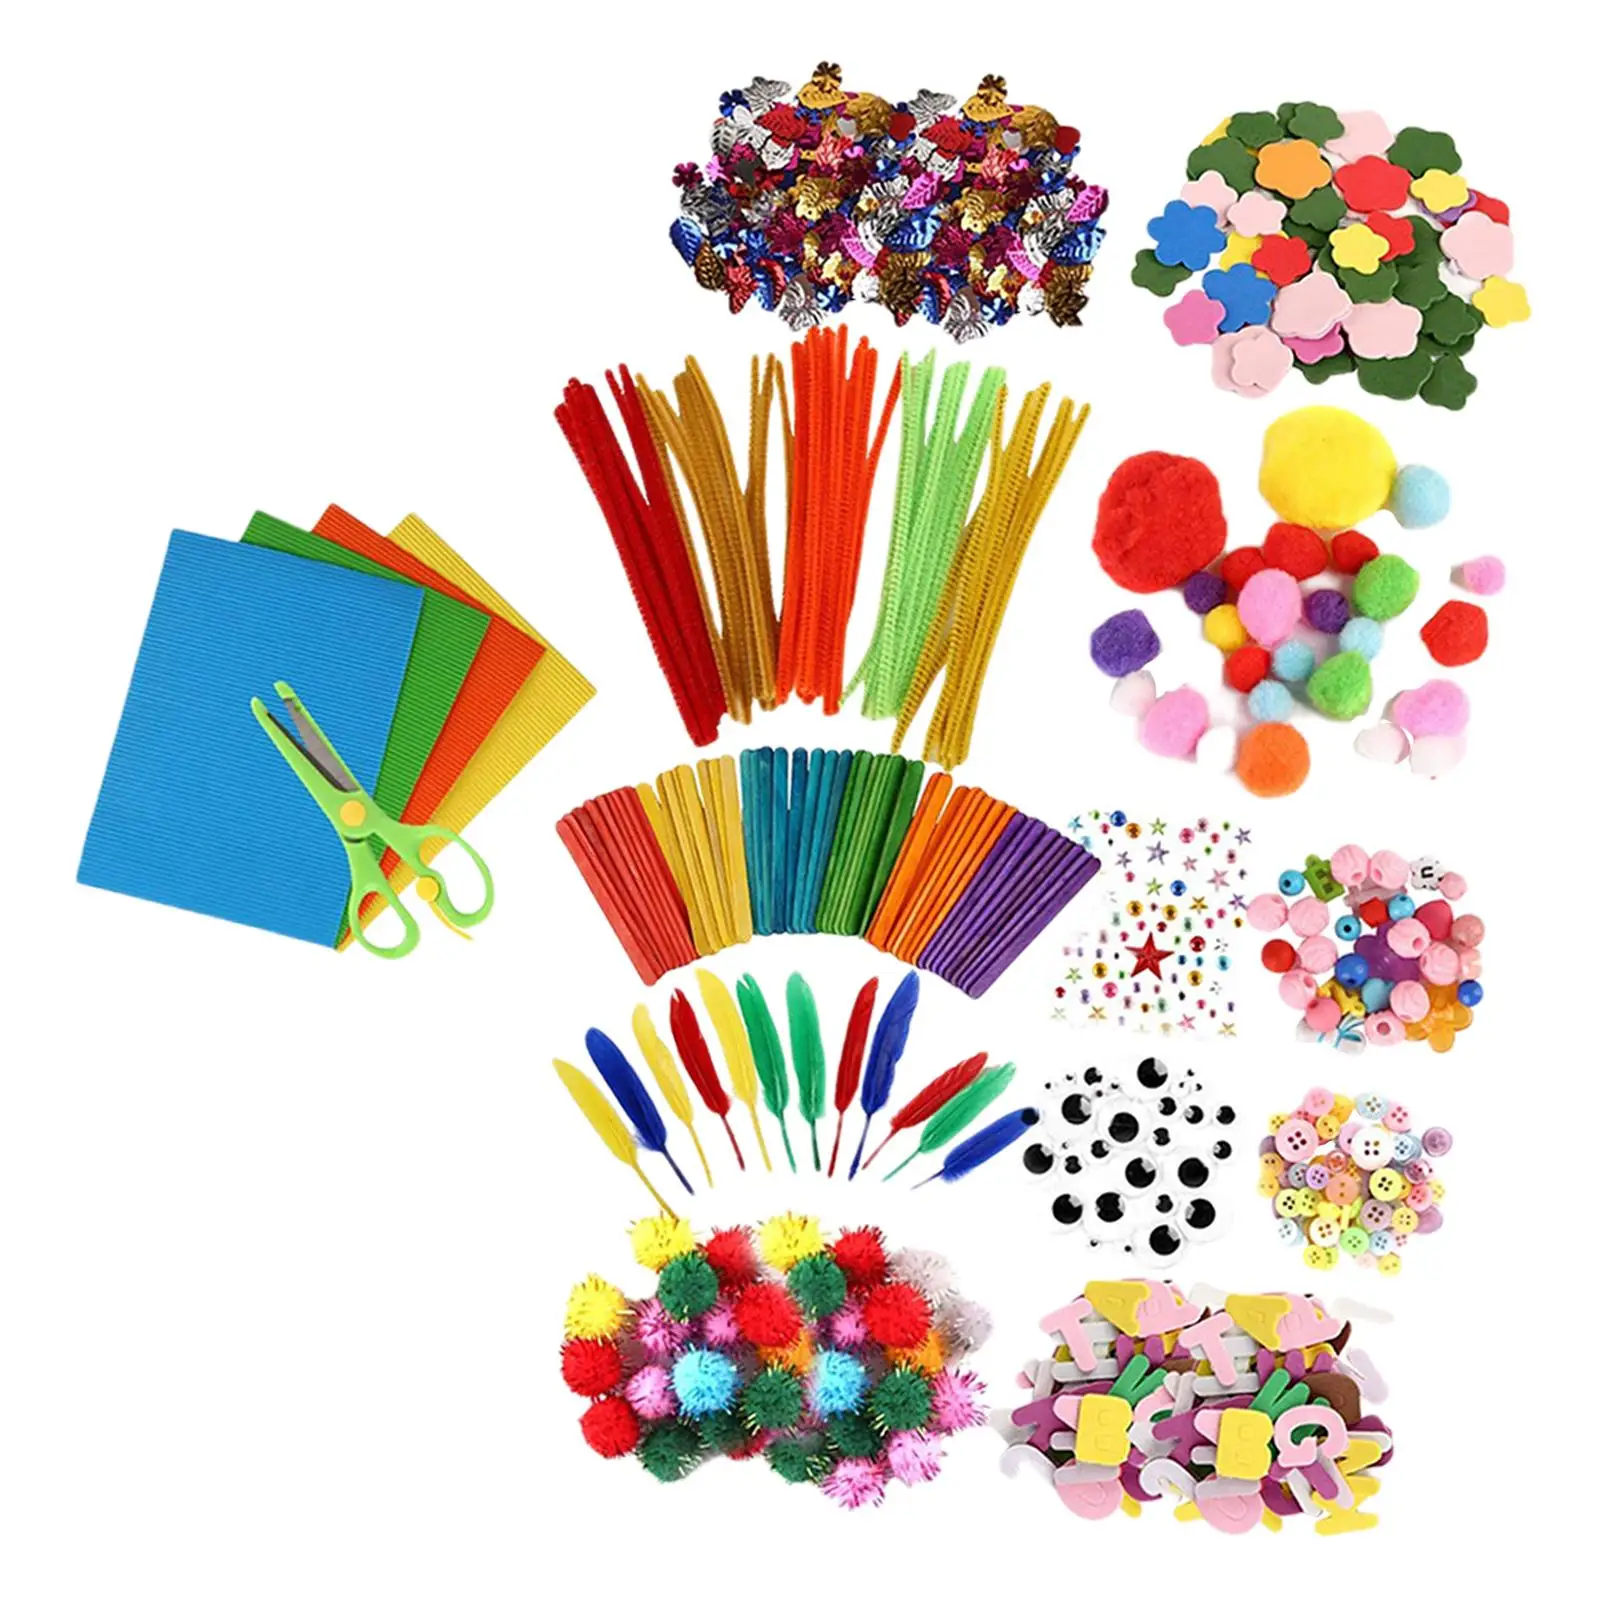 500 Pieces Kids Art & Craft Supplies Assortment Set Pipe Cleaners Craft Kit for Boys Girls